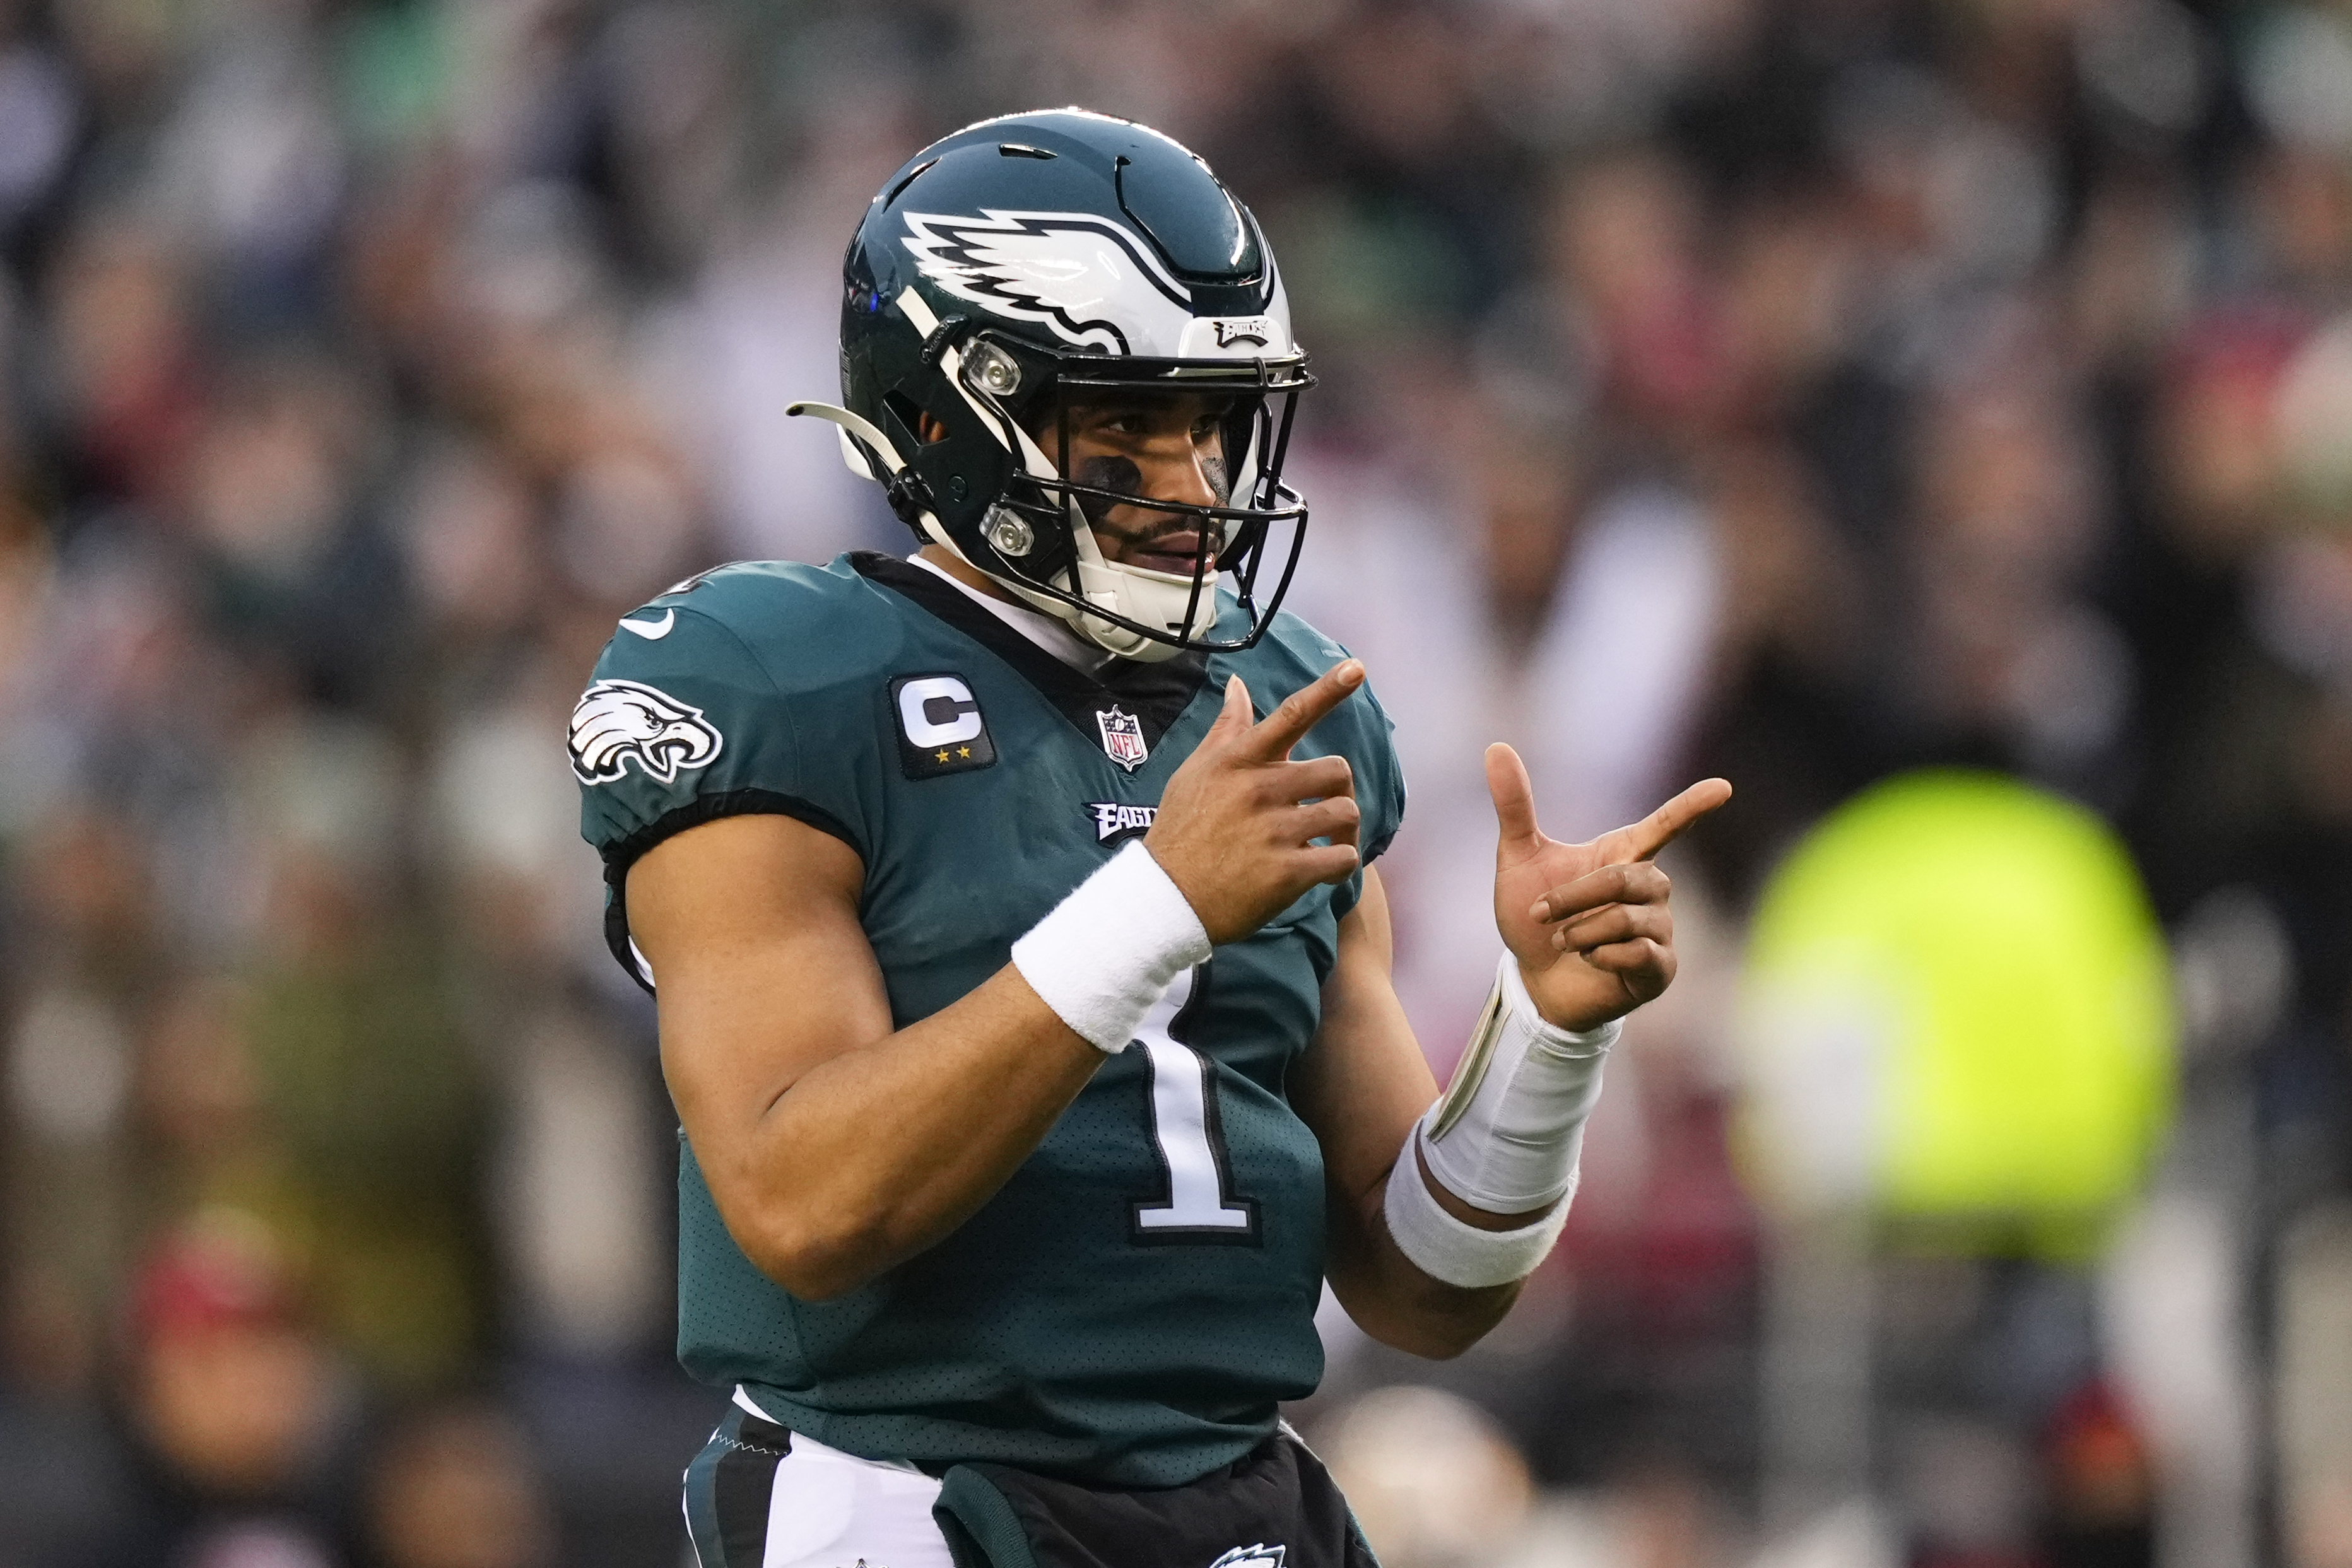 Eagles-49ers: Breaking down the NFC Championship game by the